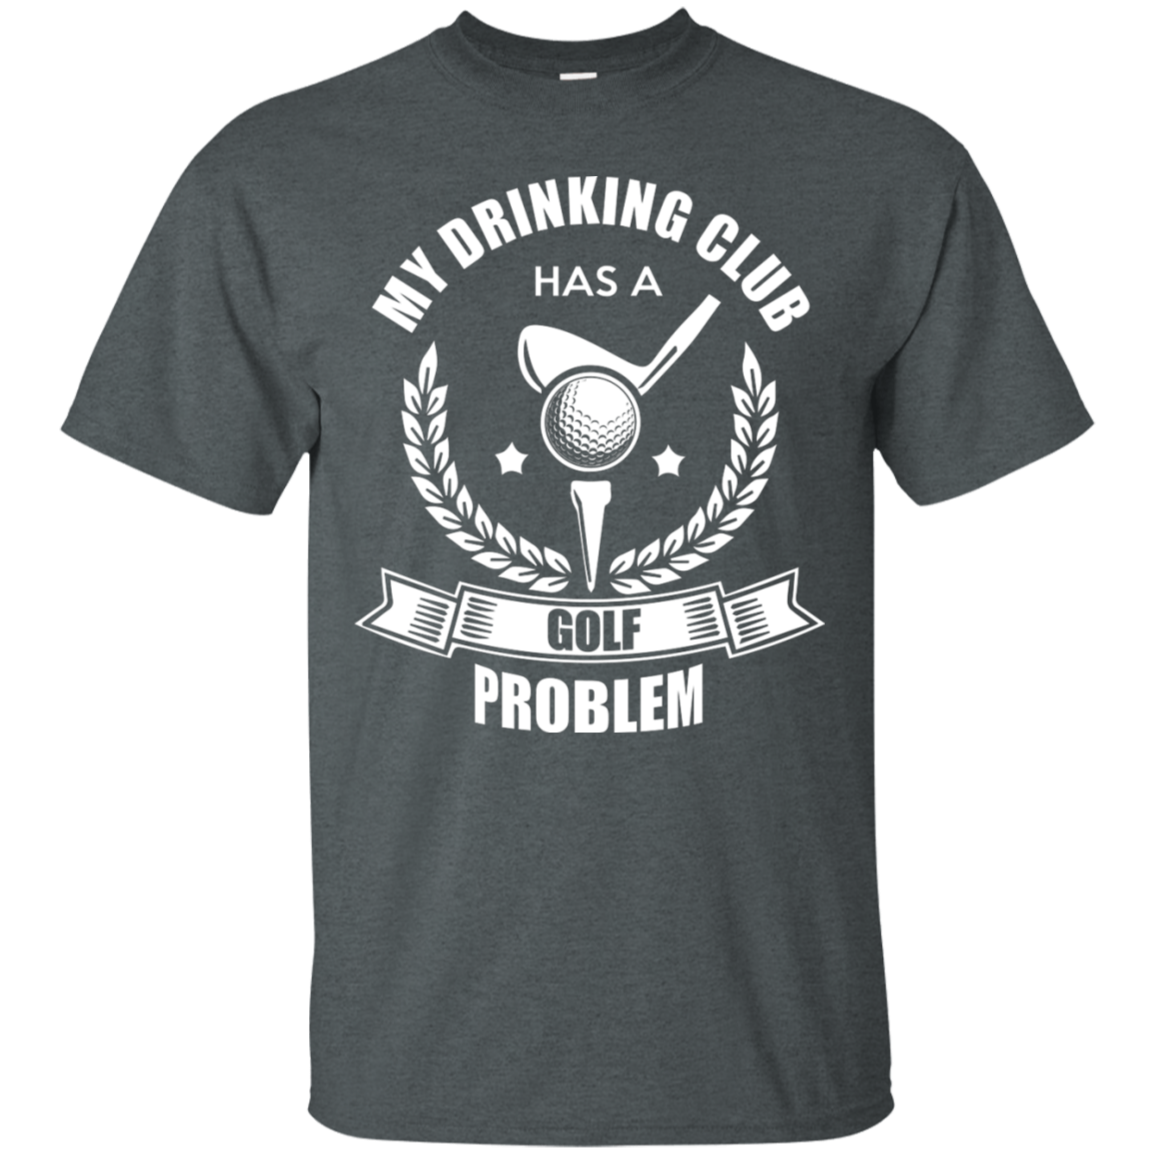 My Drinking Club Has A Golf Problem T-Shirt Apparel - The Beer Lodge